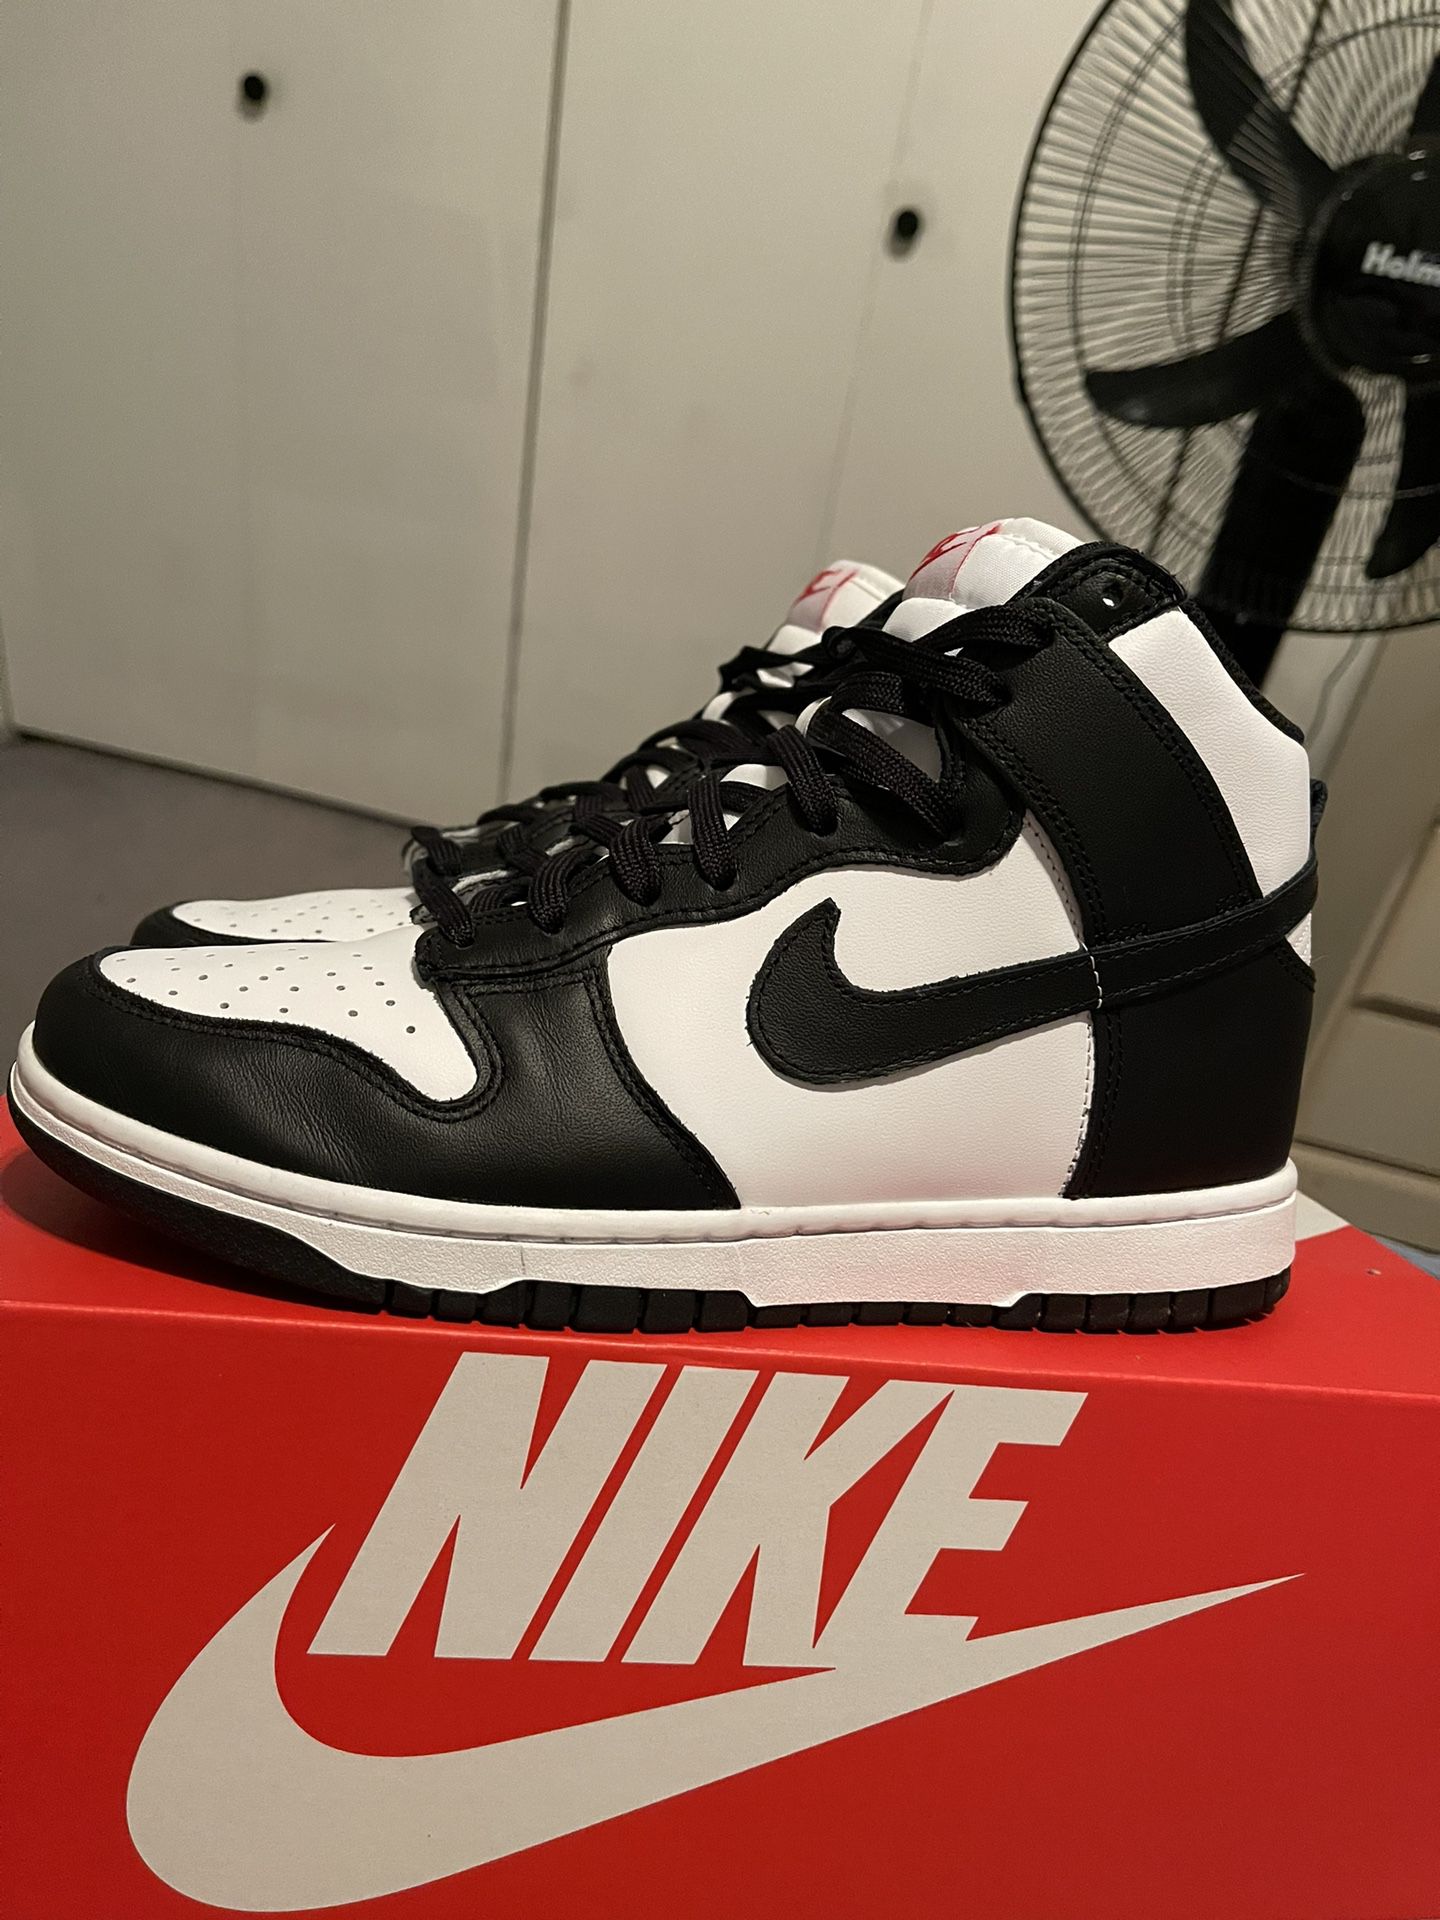 Women’s 8.5 Dunk High Black and White